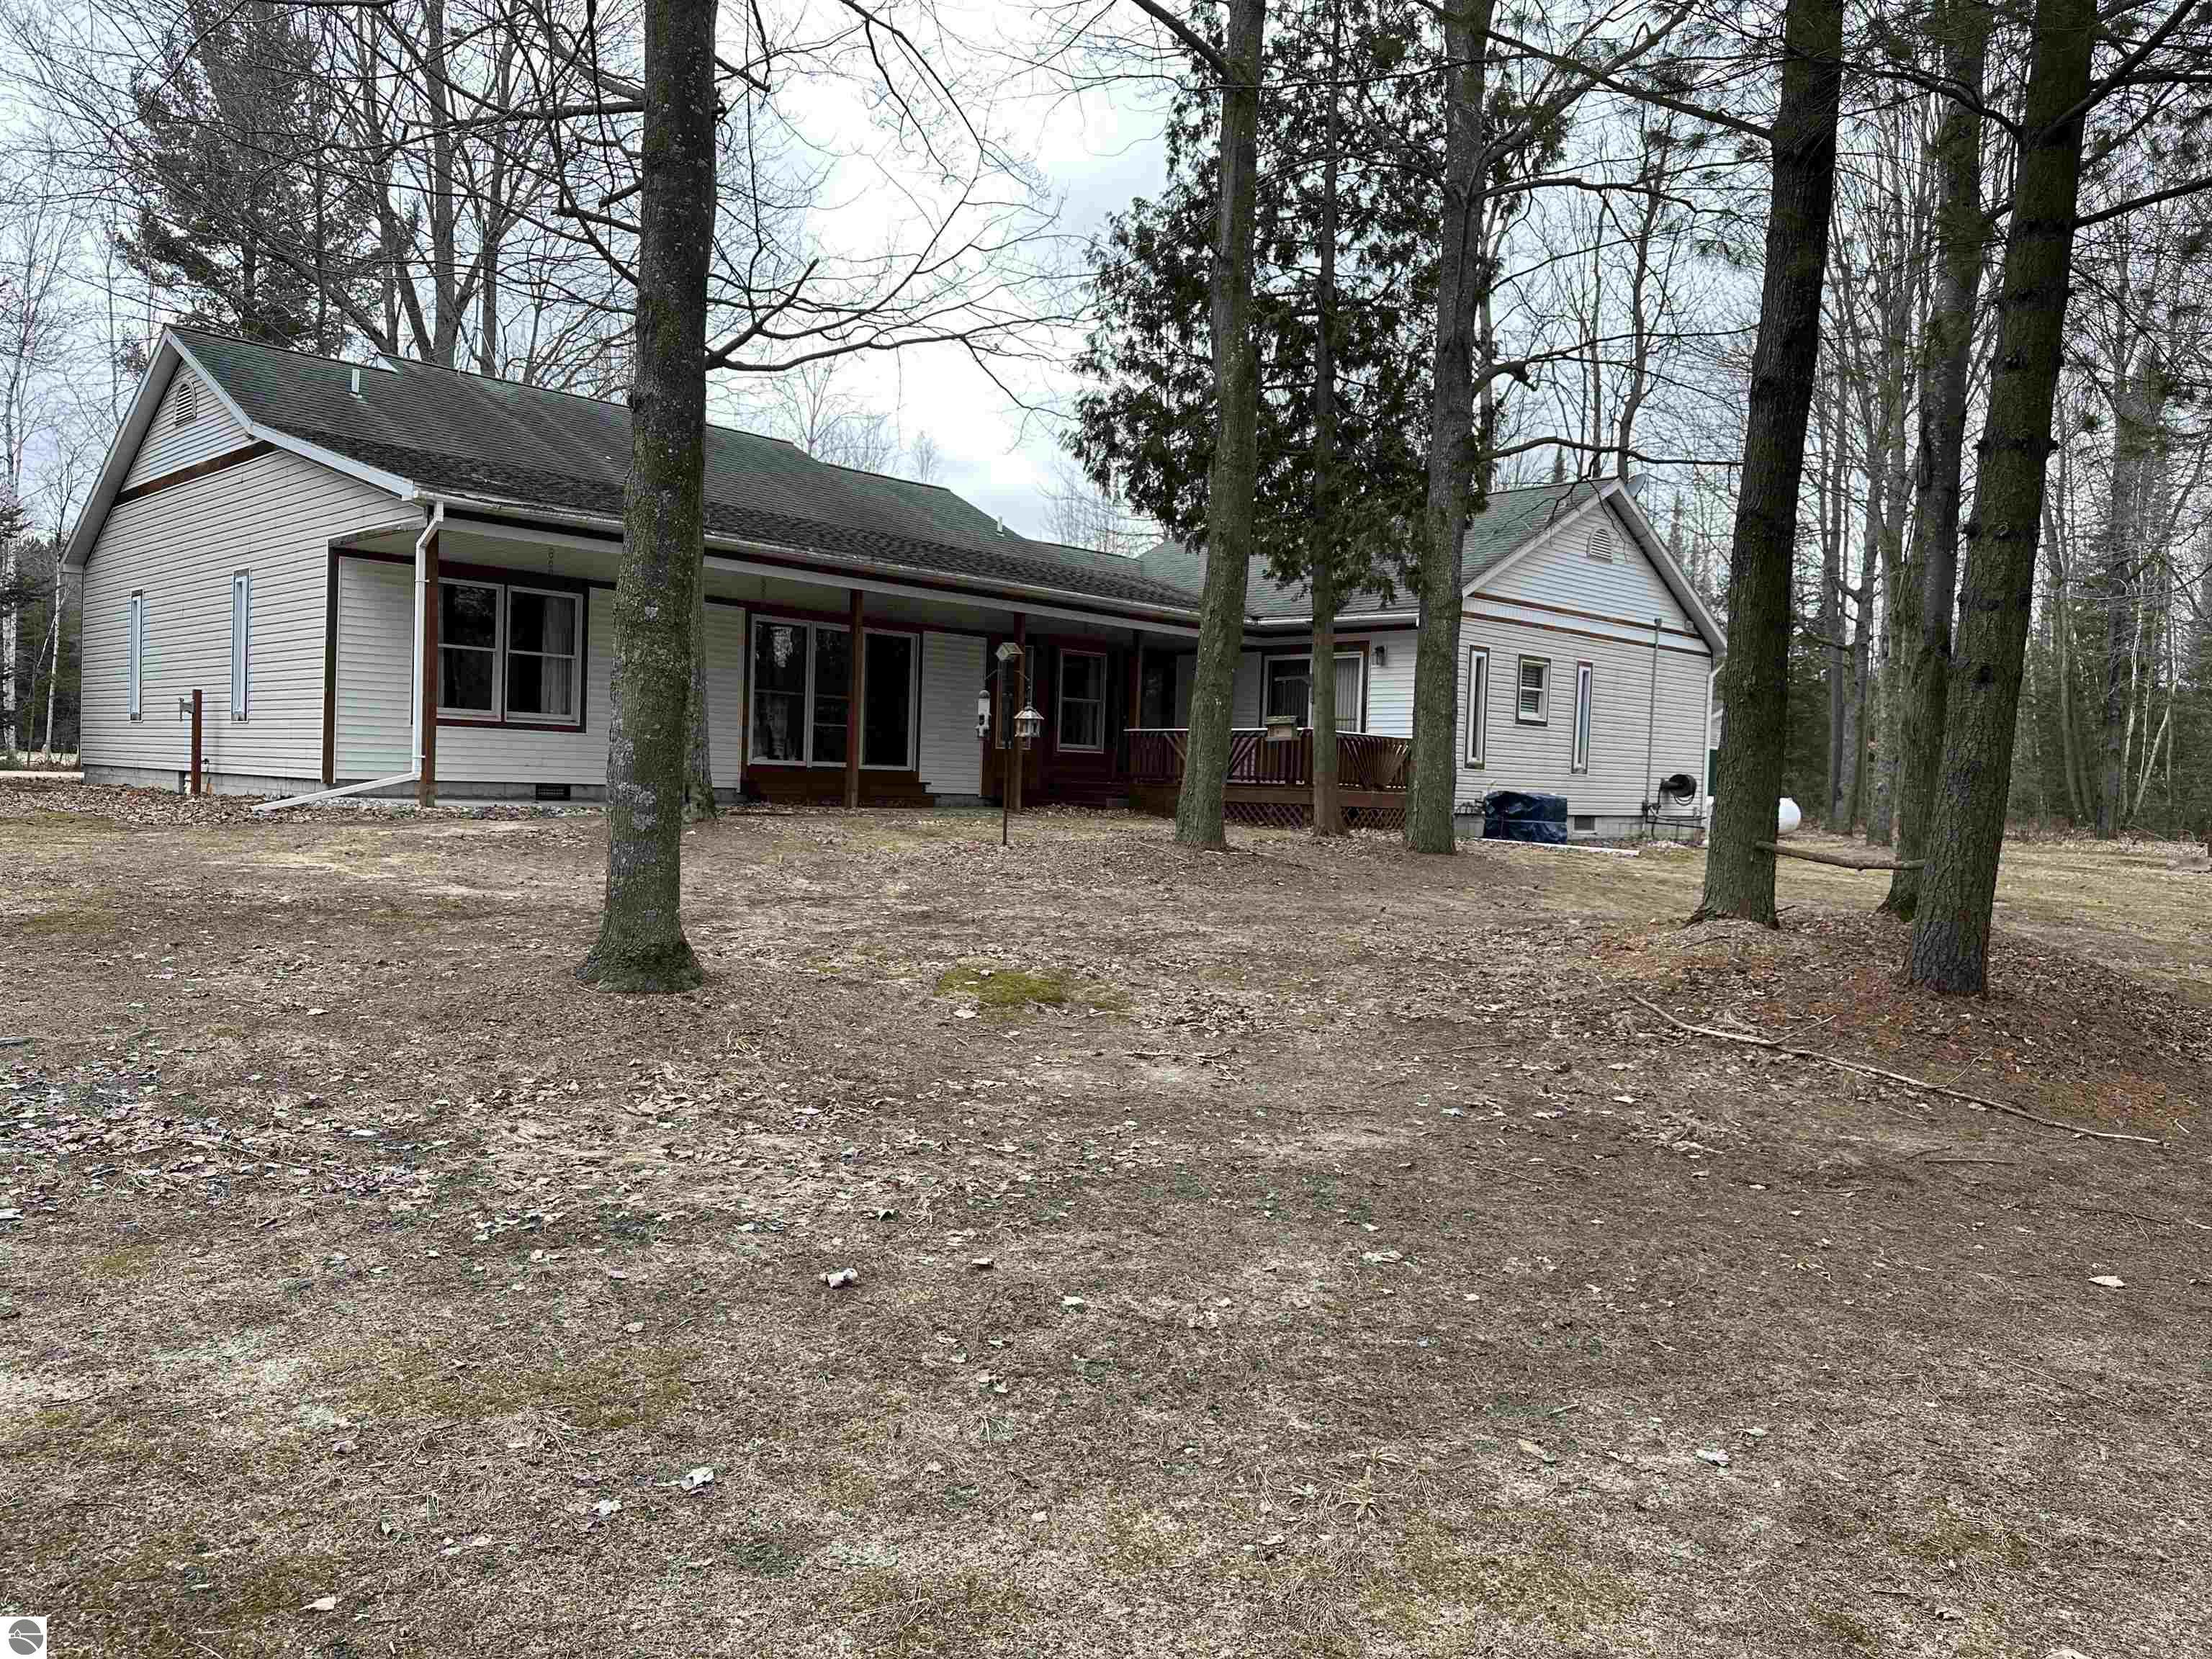 4932 Fell Drive, Marion, MI 49665 photo 63 of 73